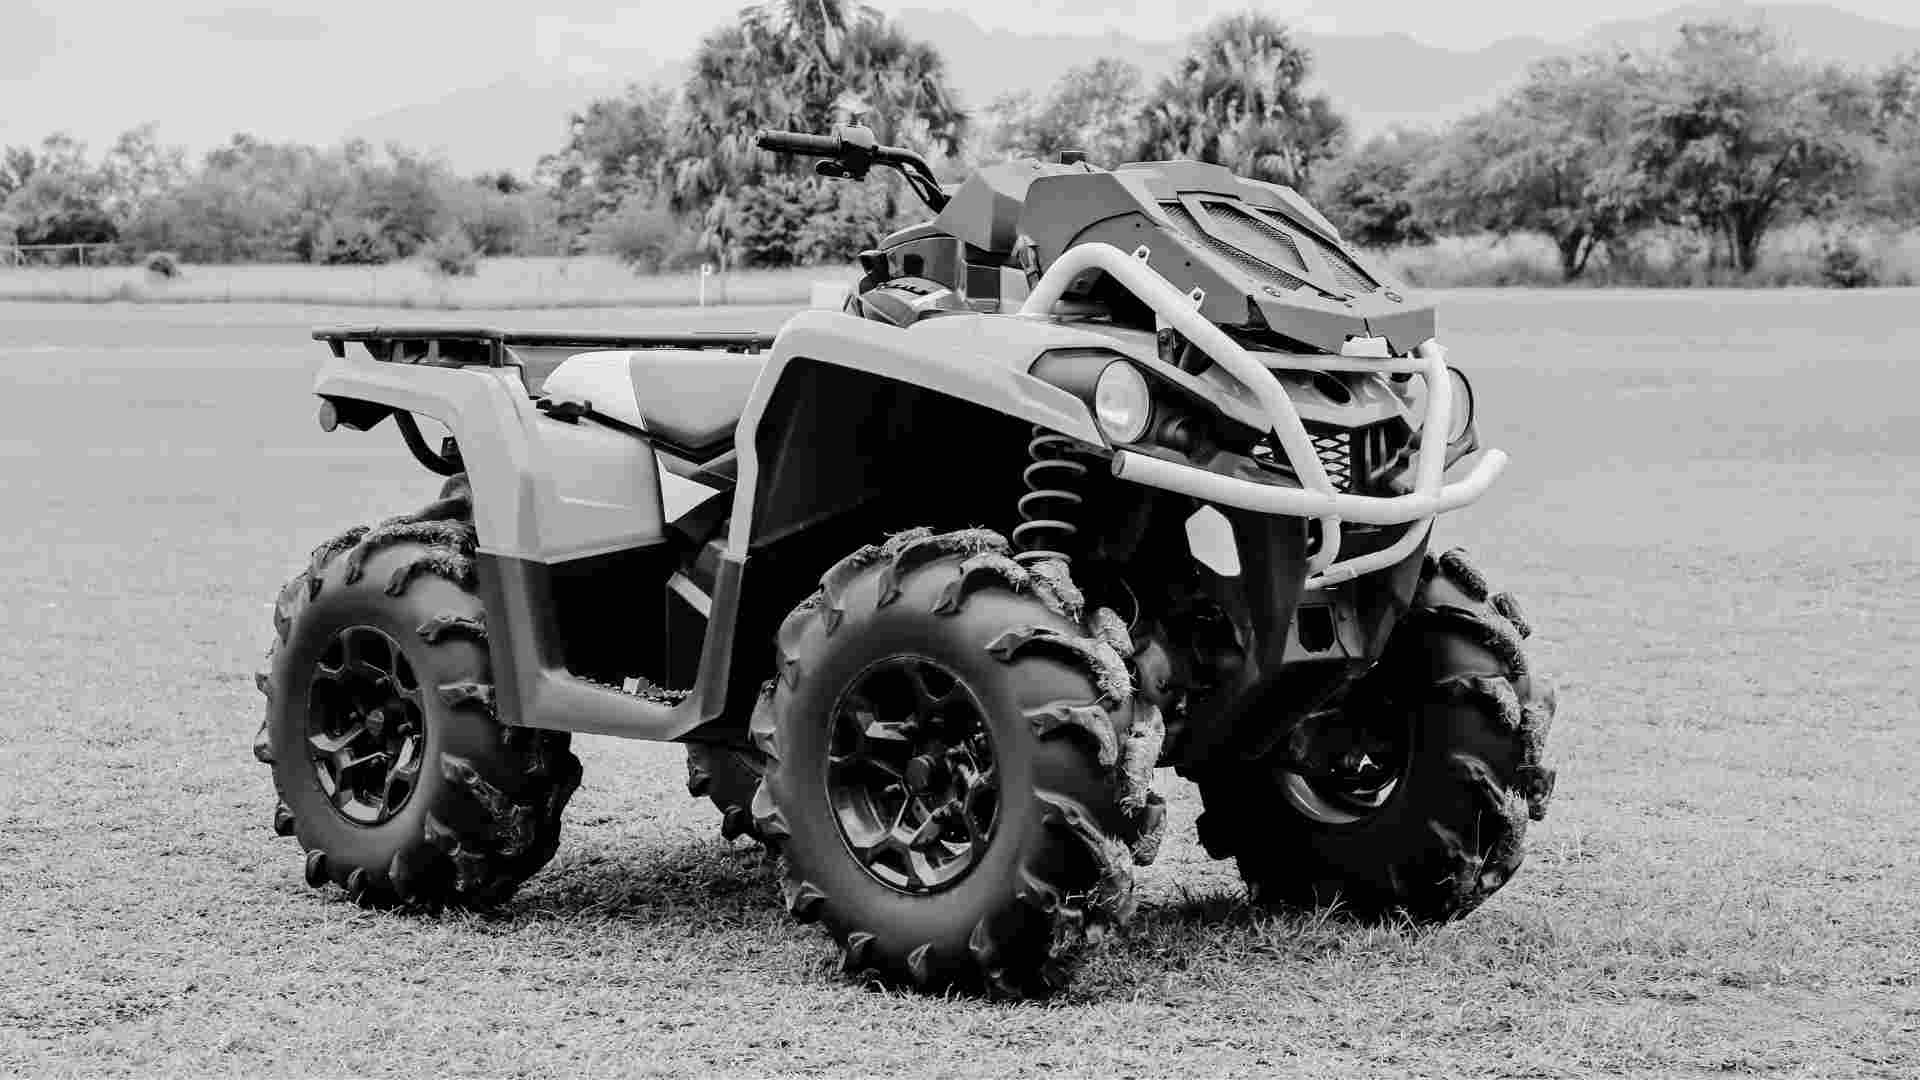 Close up of a quad bike in a grass paddock surrounded by trees